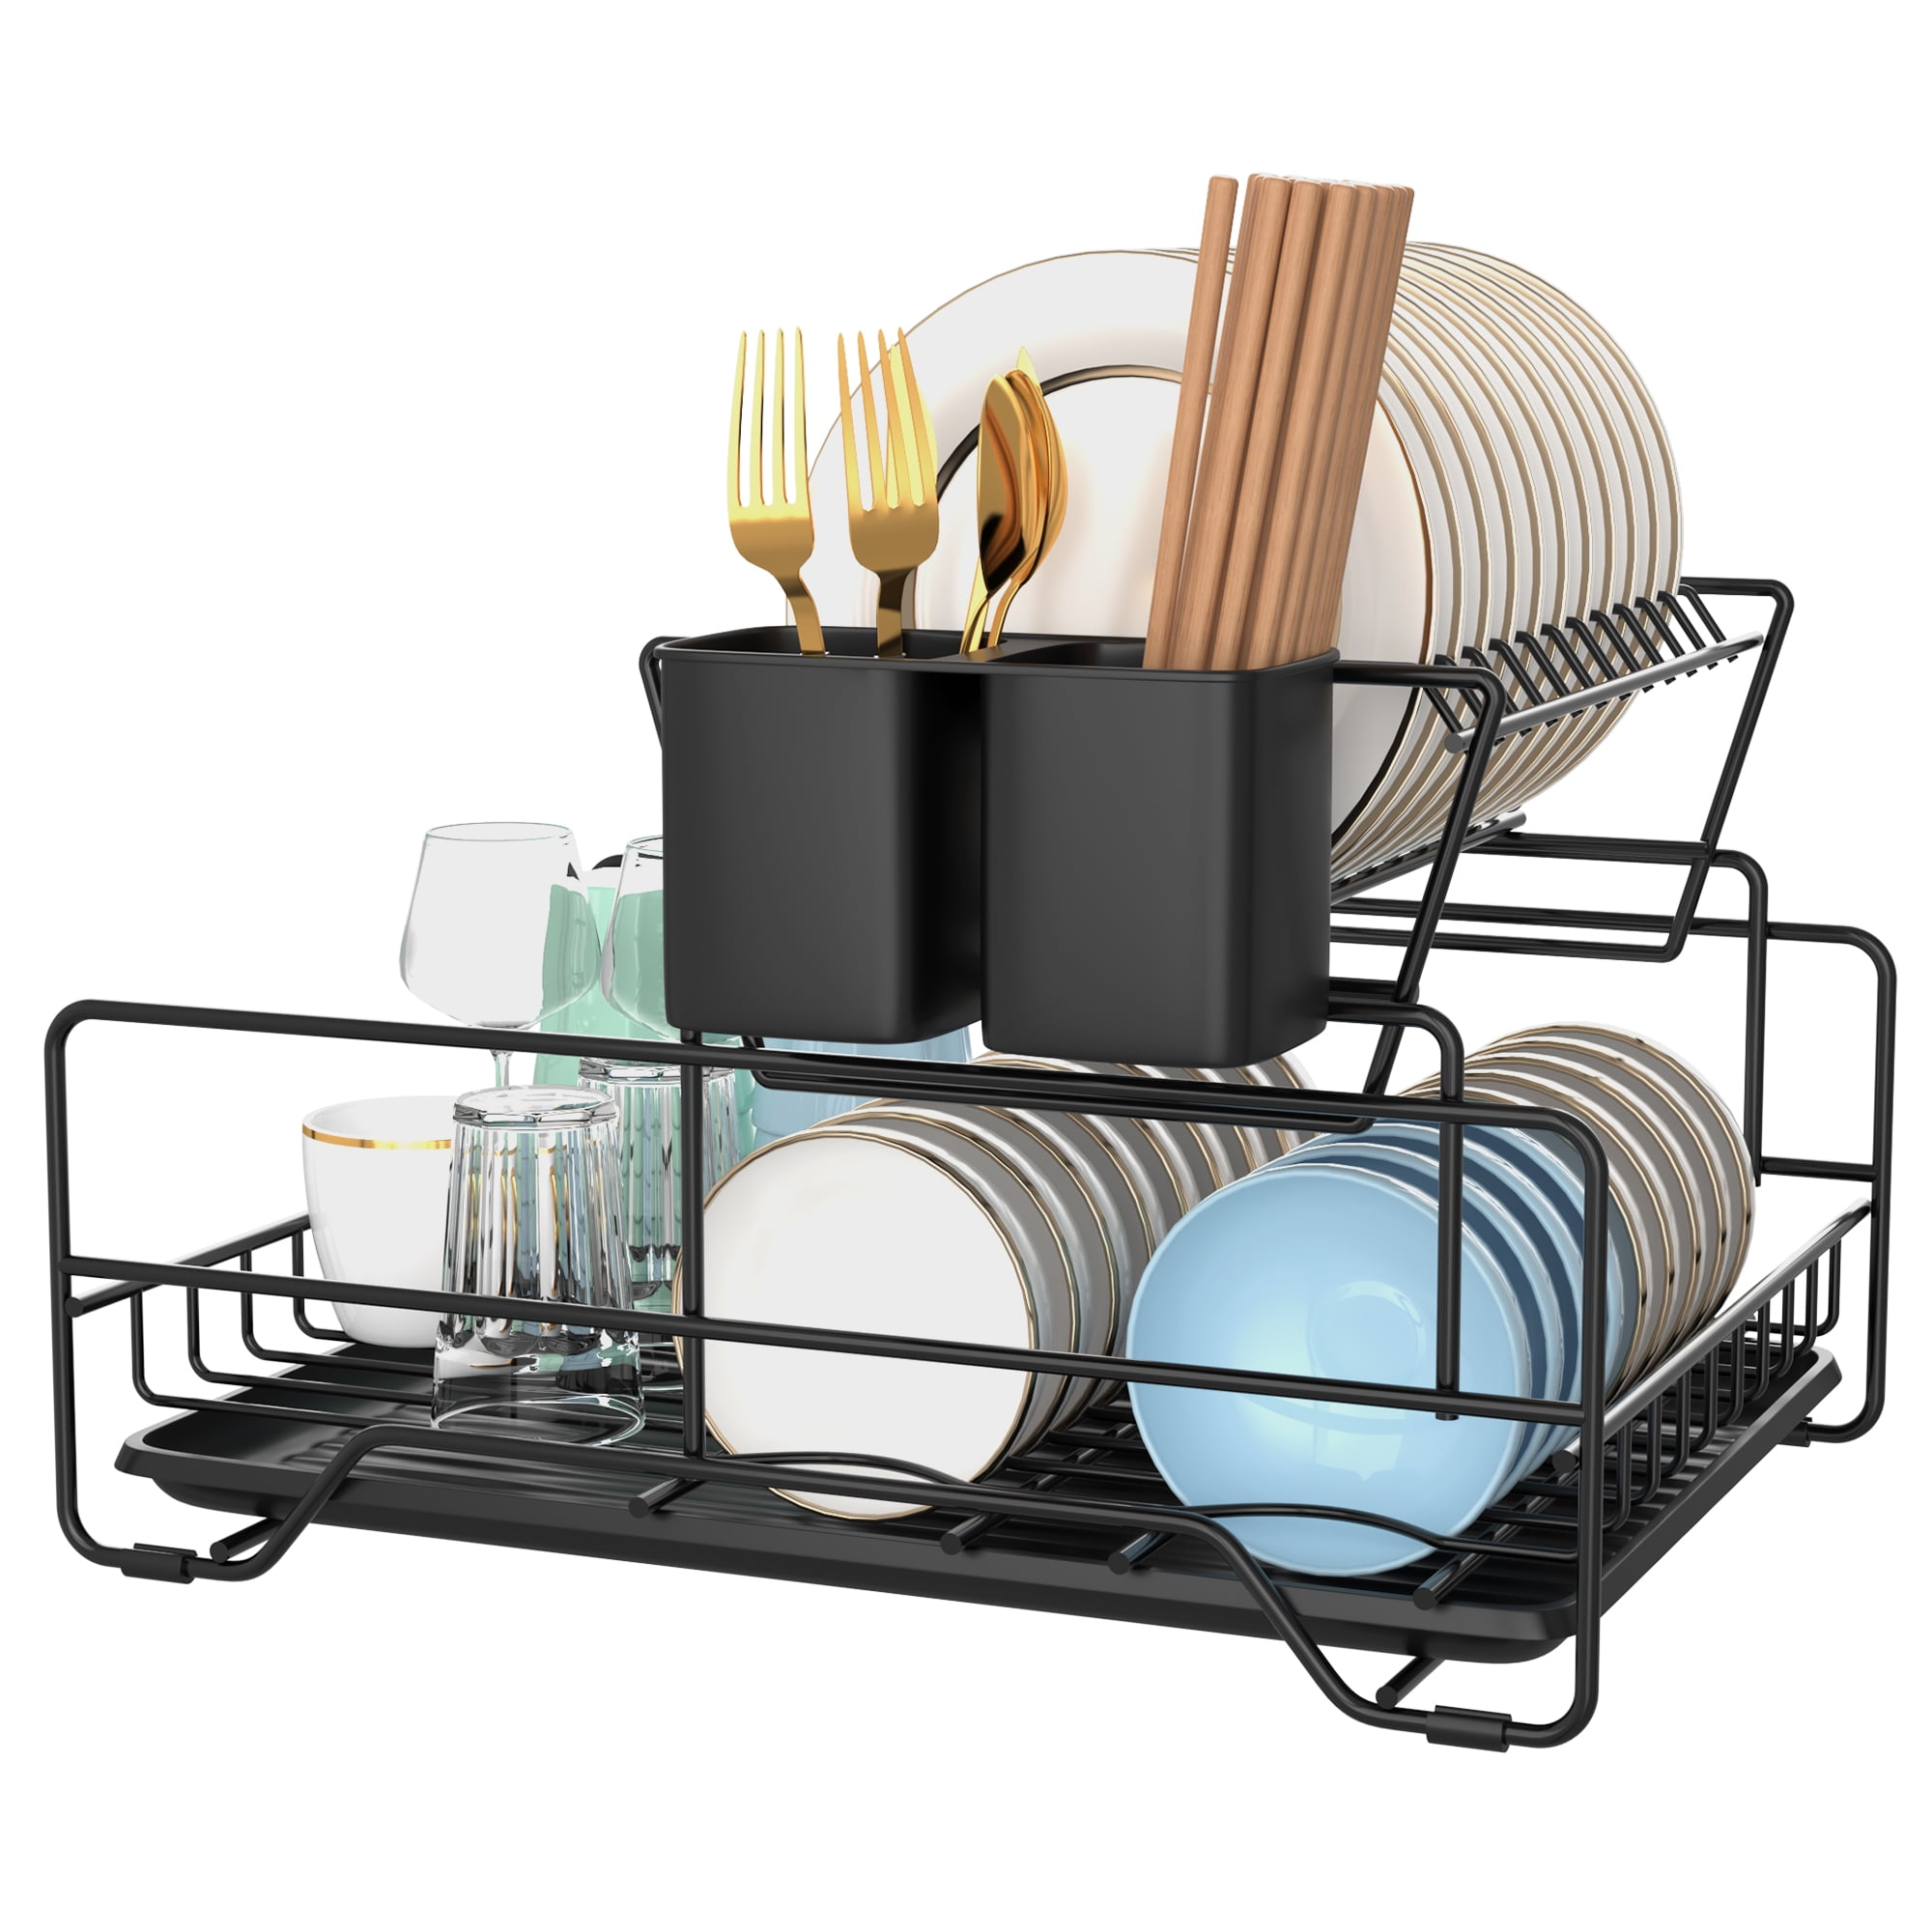 Homlly Kitchen 2 / 3 Tier Dish Drainer Removable Drying Rack